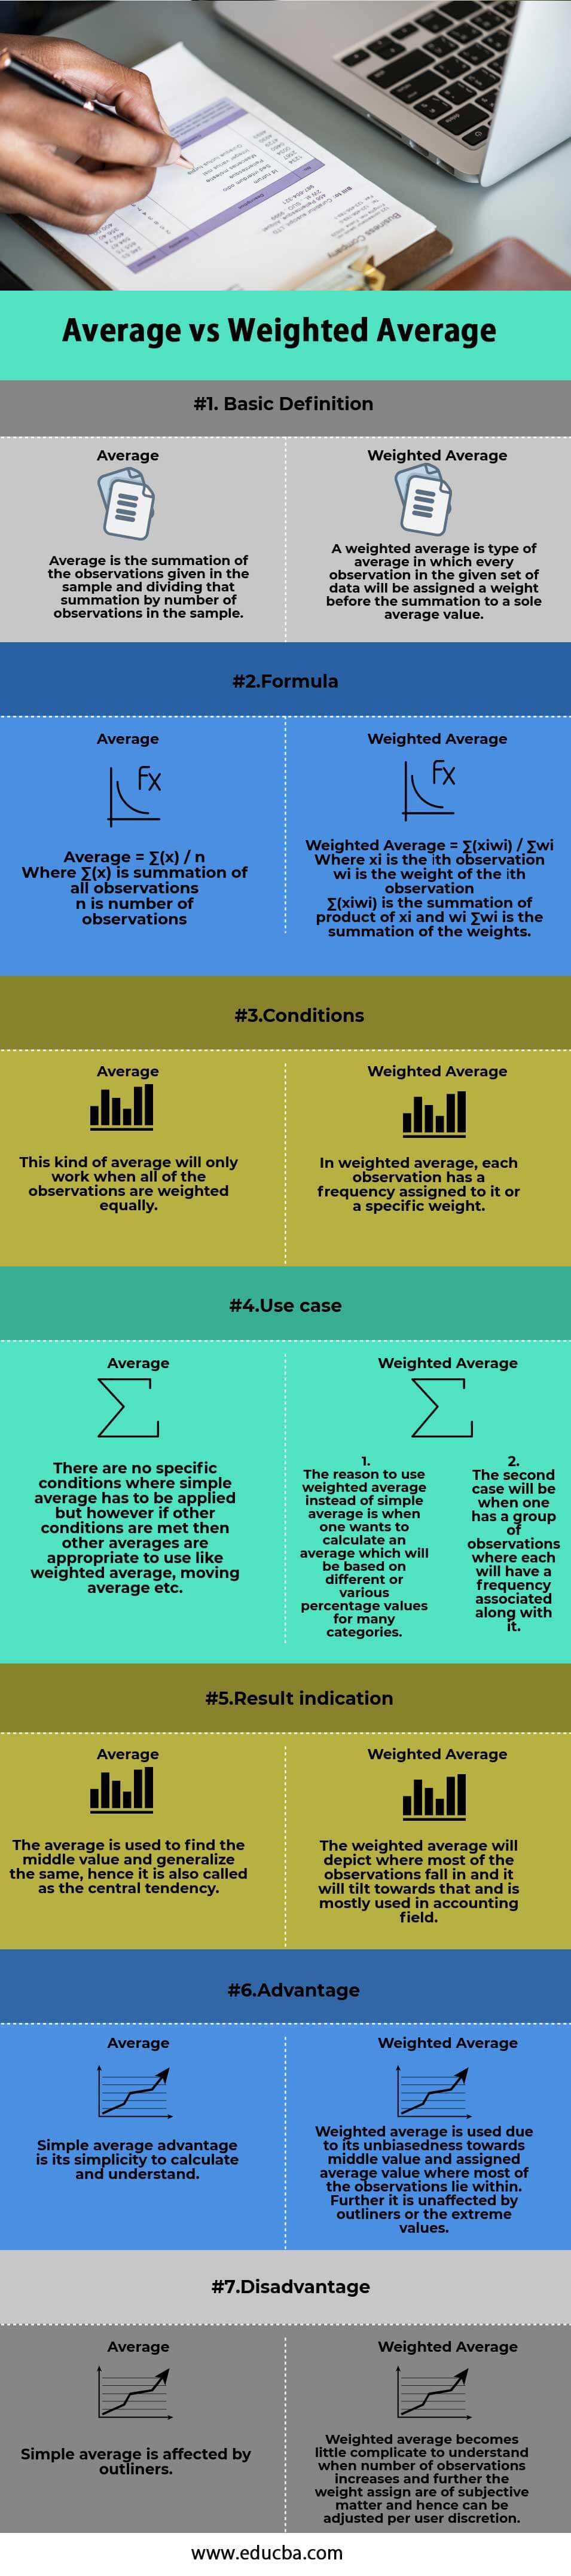 Average vs Weighted Average info